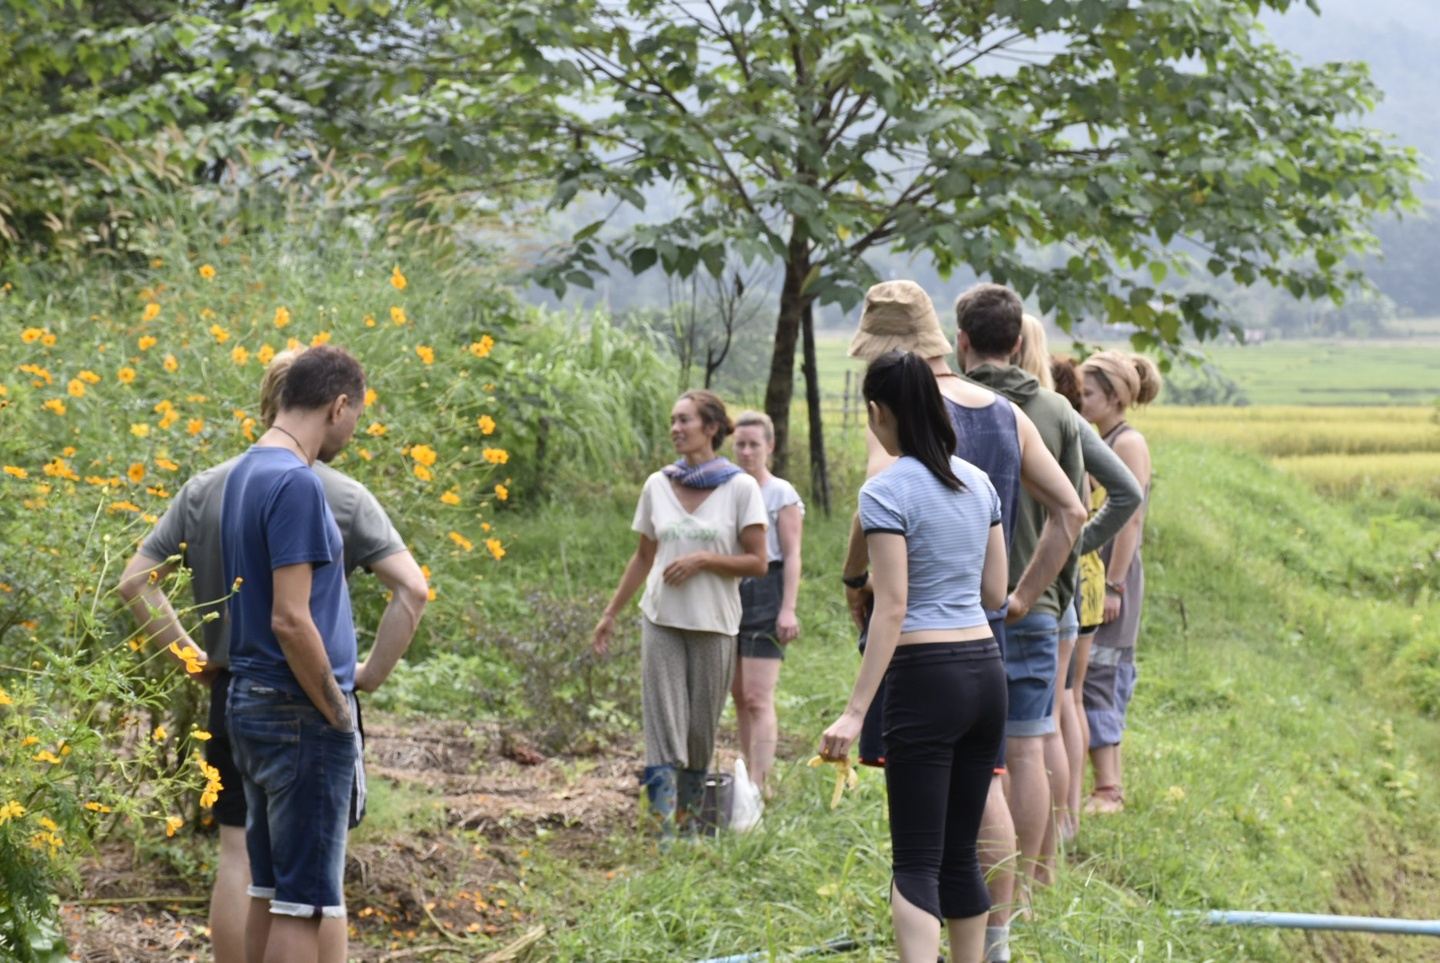 Transition 4 day Permaculture course, self-reliance, well-being